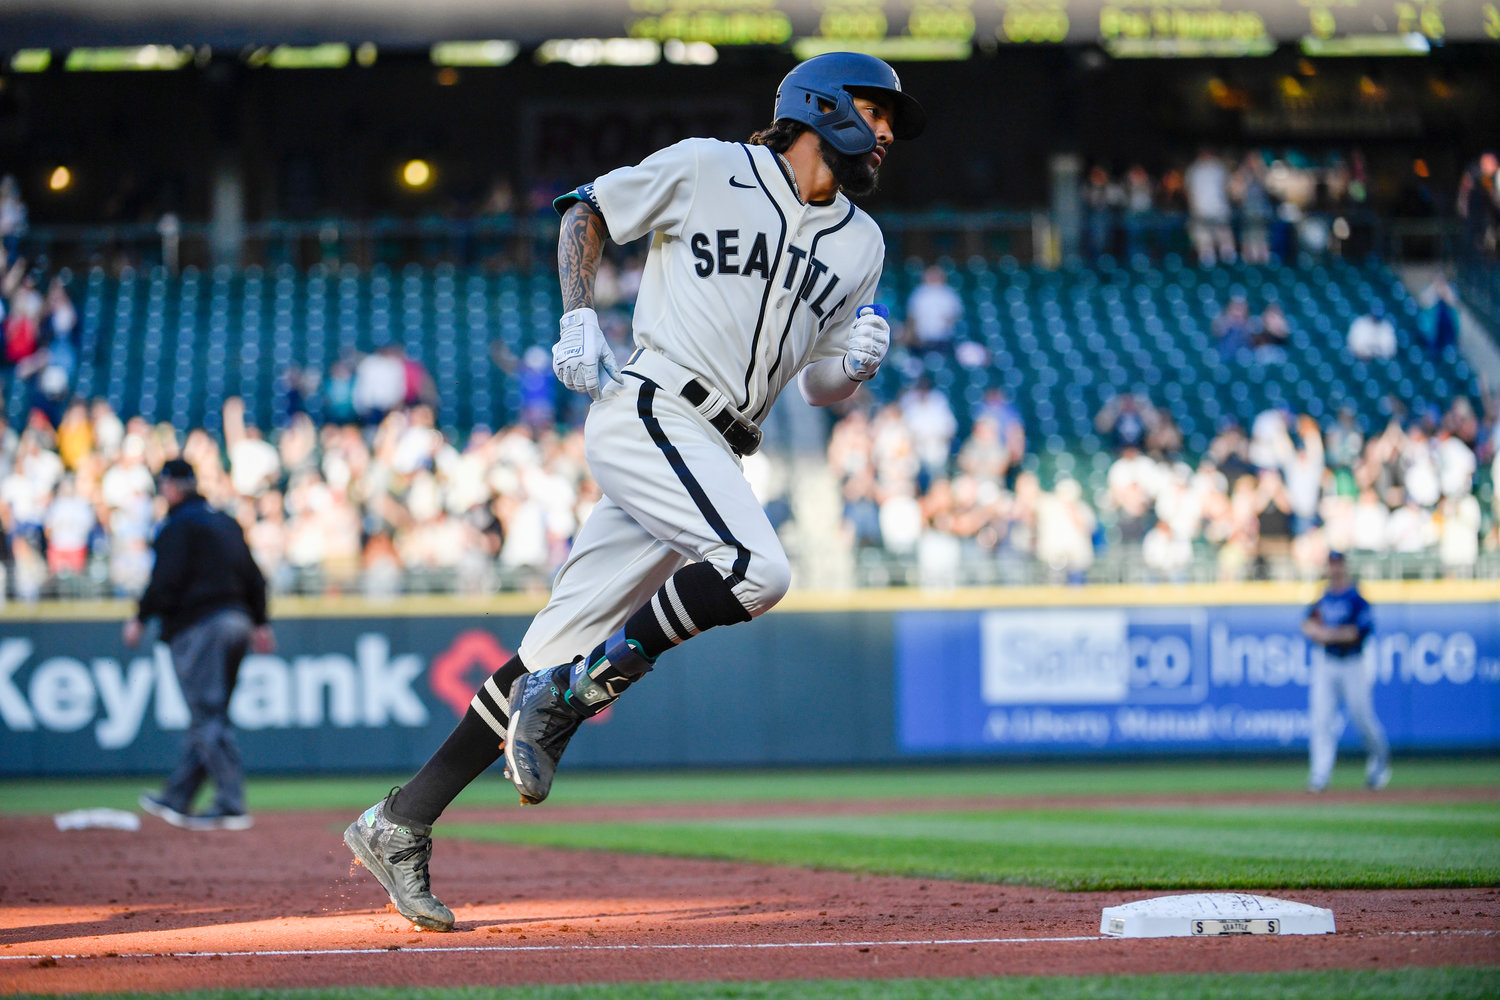 J.P. Crawford of the Seattle Mariners rounds third base after hitting a grand slam during the second inning against the Tampa Bay Rays at T-Mobile Park in Seattle on Saturday, June 19, 2021. The Mariners edged the Rays in the 10th inning, 6-5. (Alika Jenner/Getty Images/TNS)